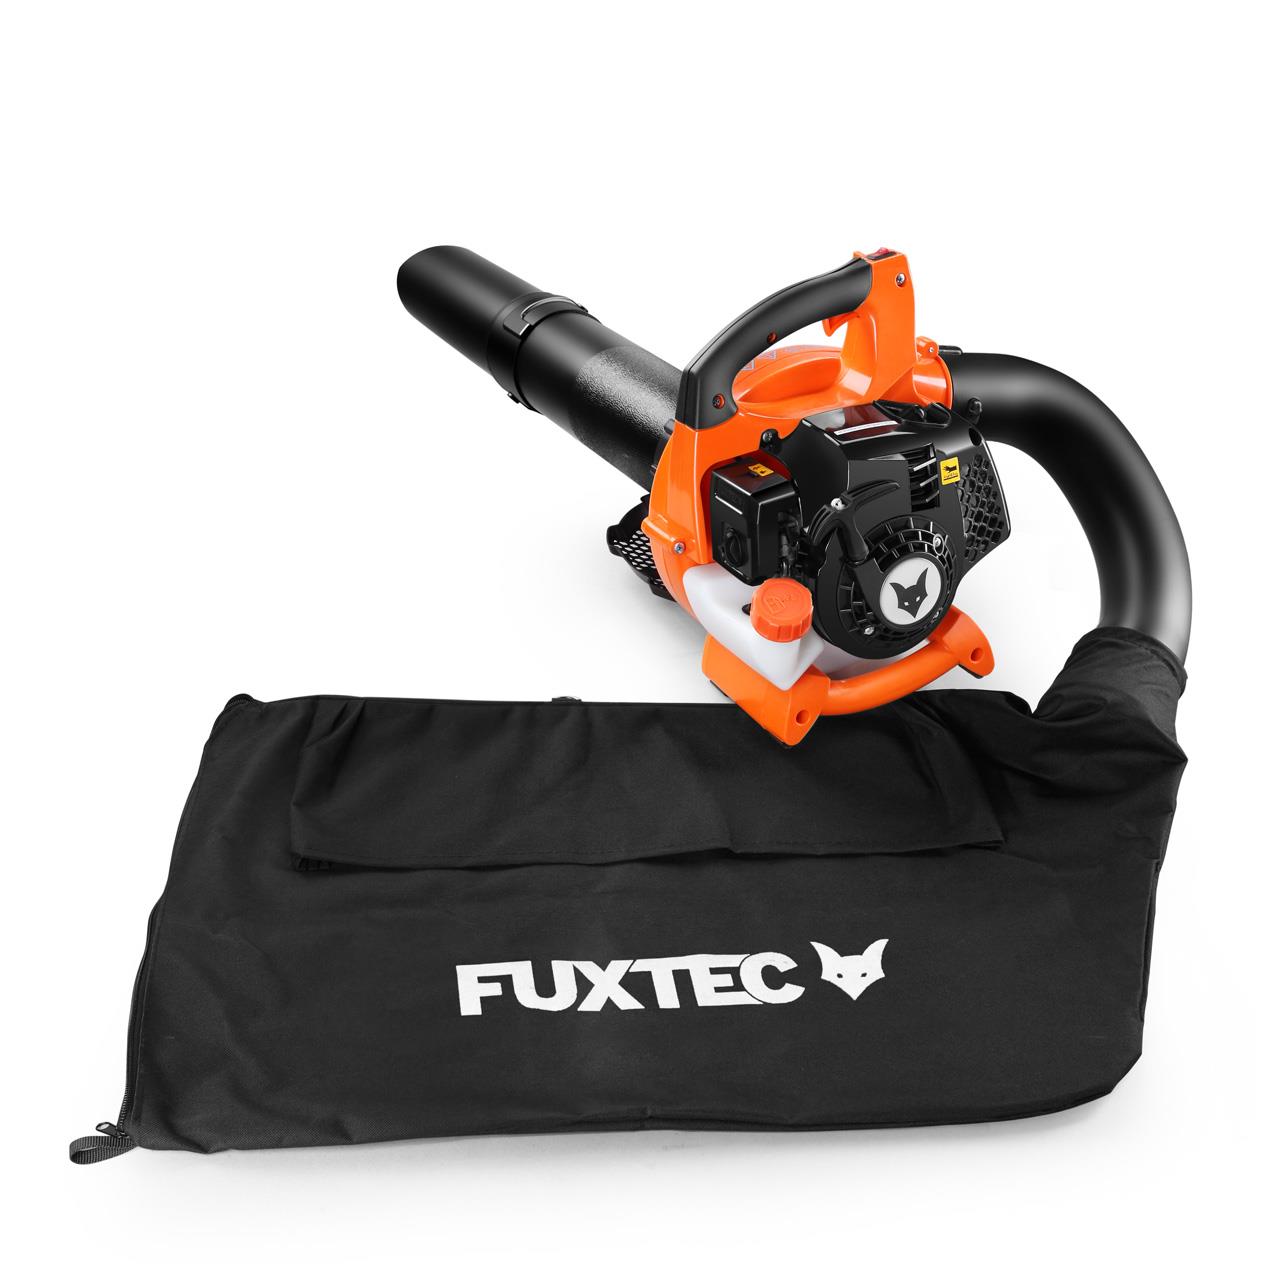 Petrol leaf blower 26cc 4in1 blowing-vacuum-shredder-function + collection bag FUXTEC LBS126